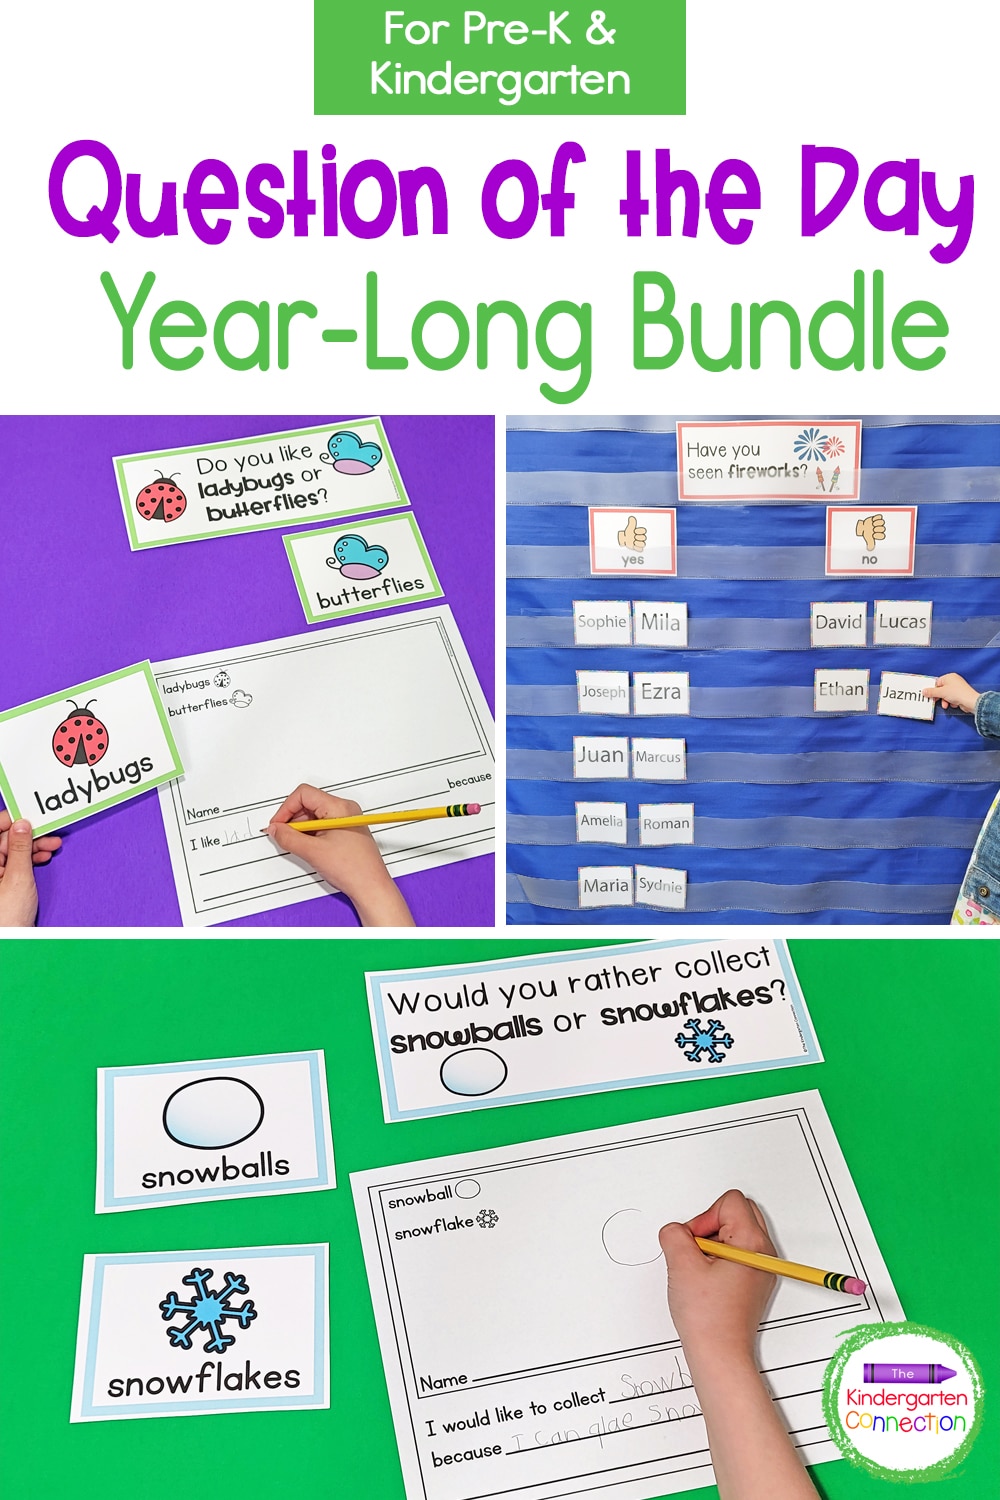 This Question of the Day Bundle for Pre-K & Kindergarten includes themes for the whole year that will provide tons of learning fun!